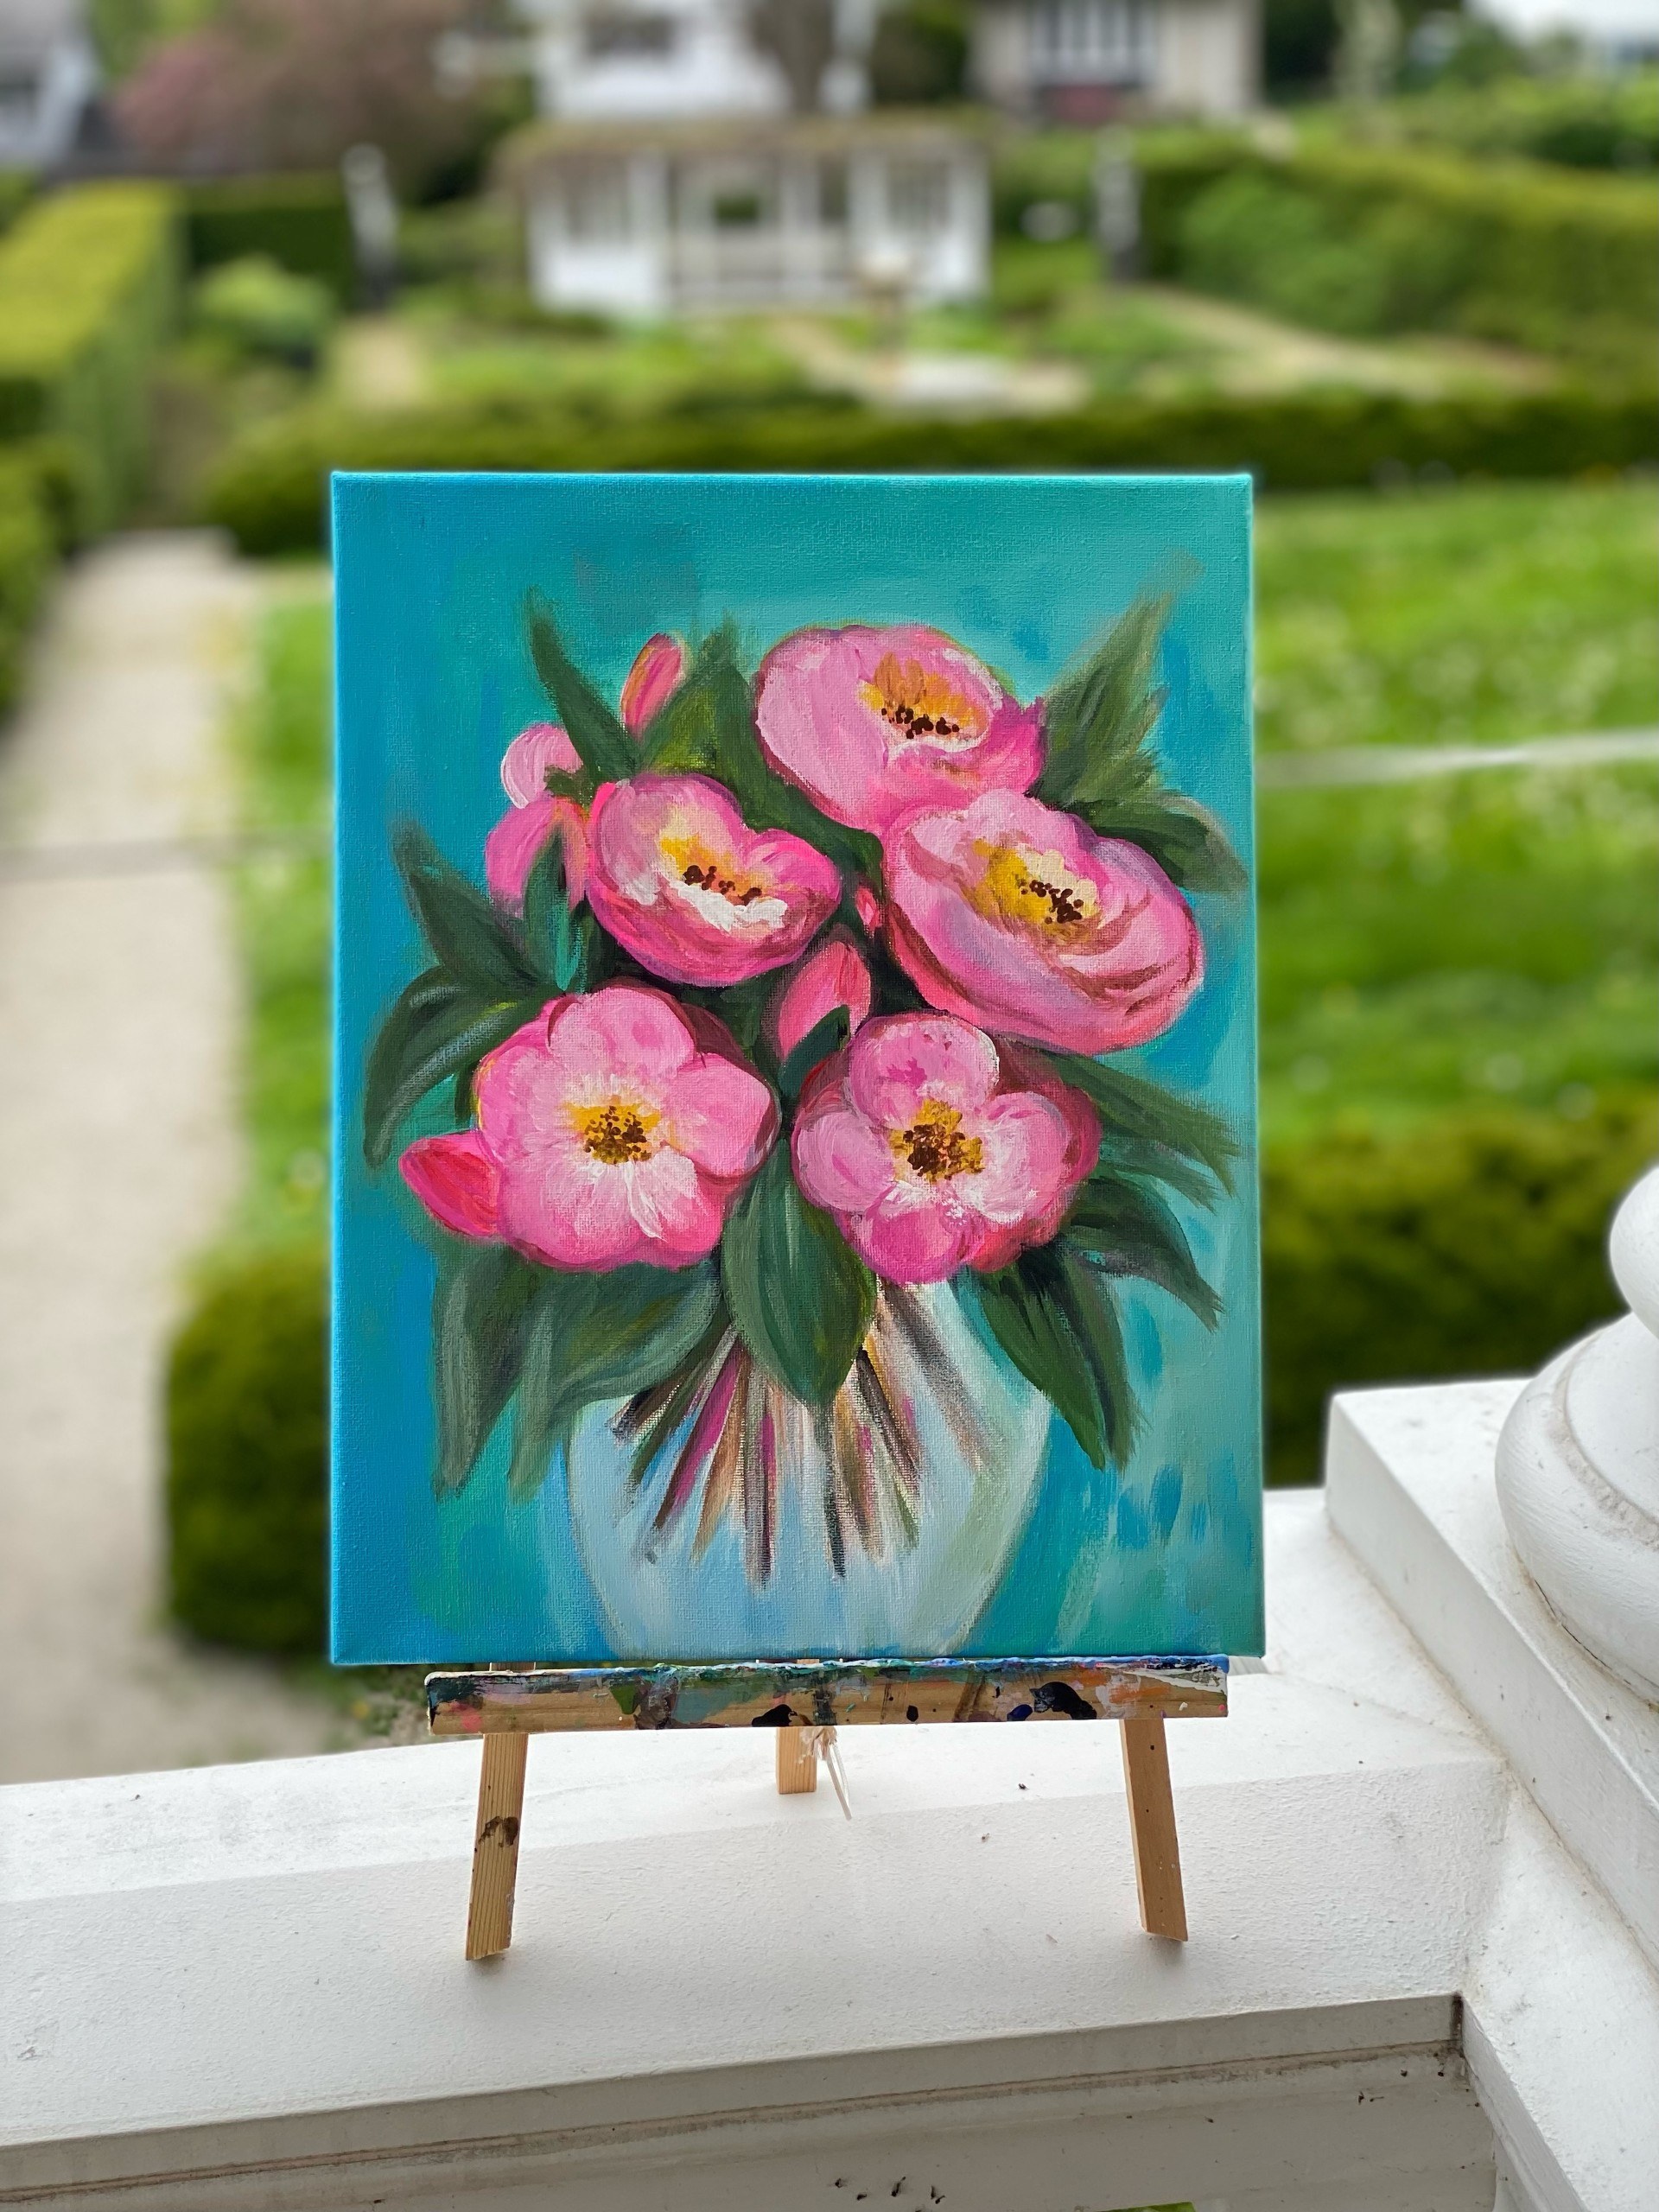 "Wild Roses for Mary" Paint Night with Jill Andress